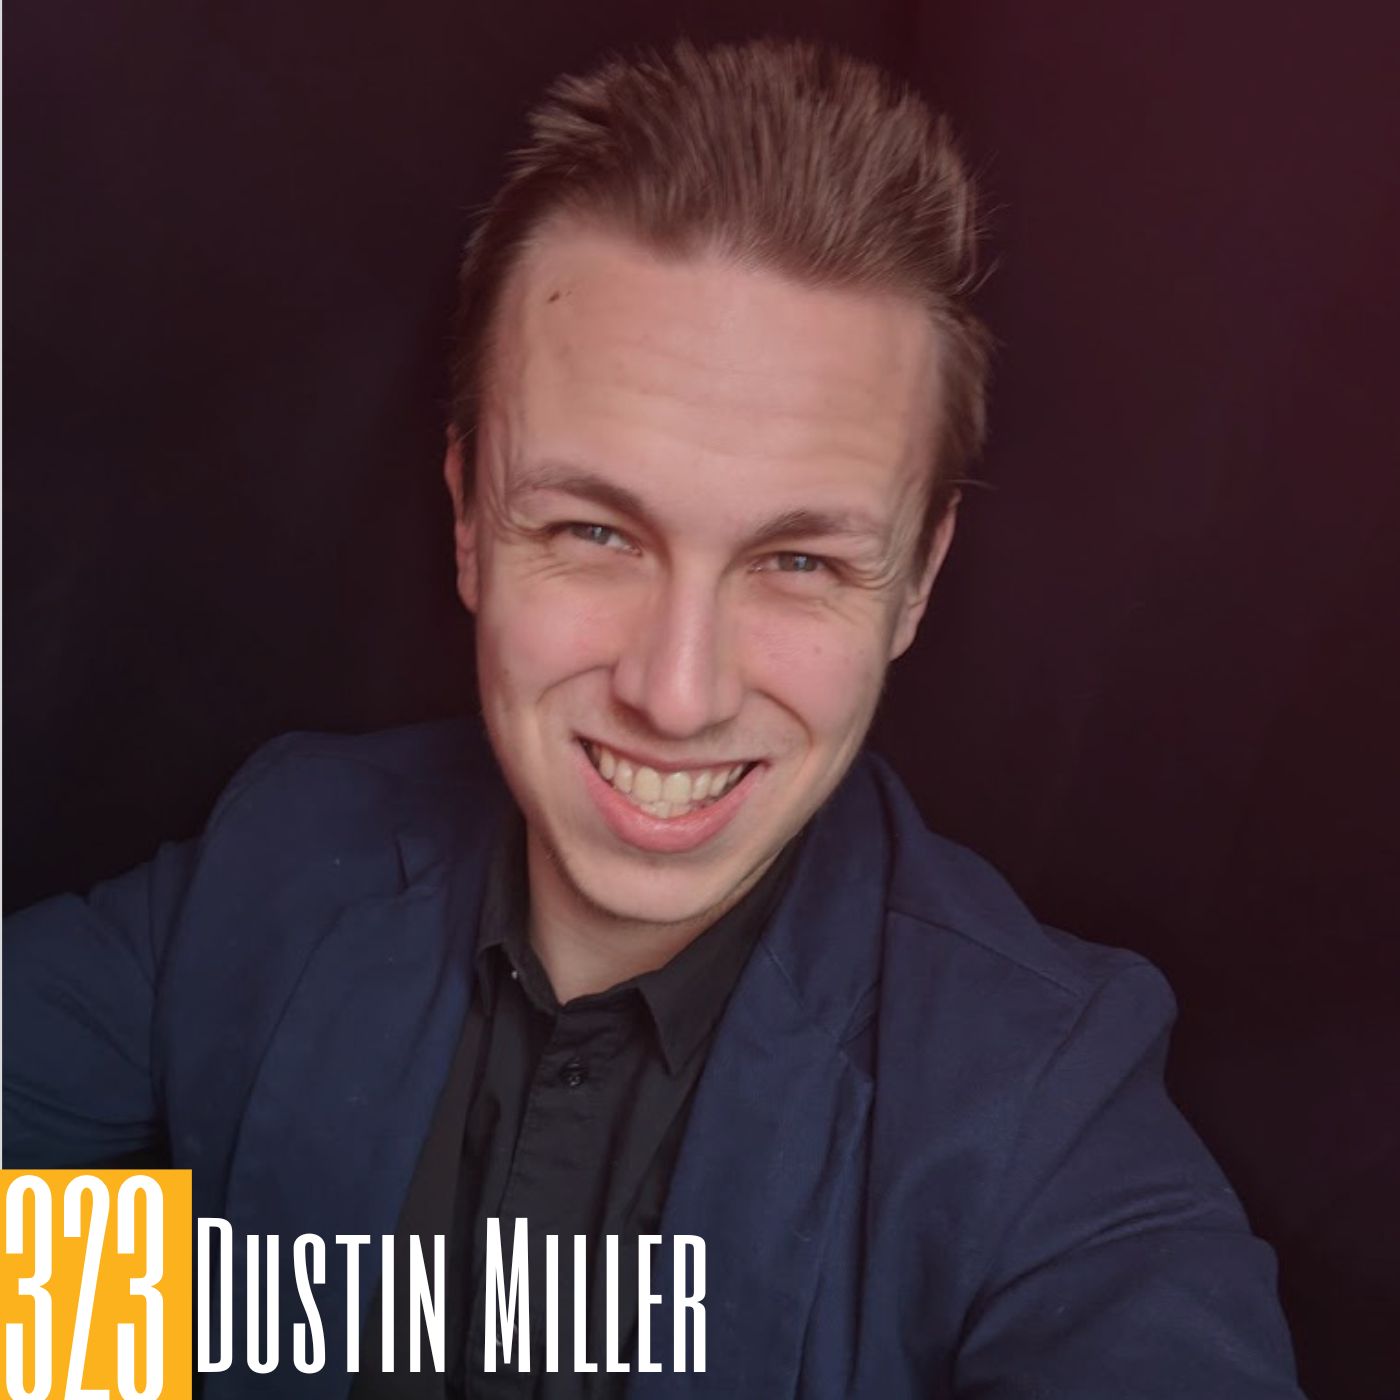 323 Dustin Miller - Podcasting, Polymaths & The Importance of Active Listening